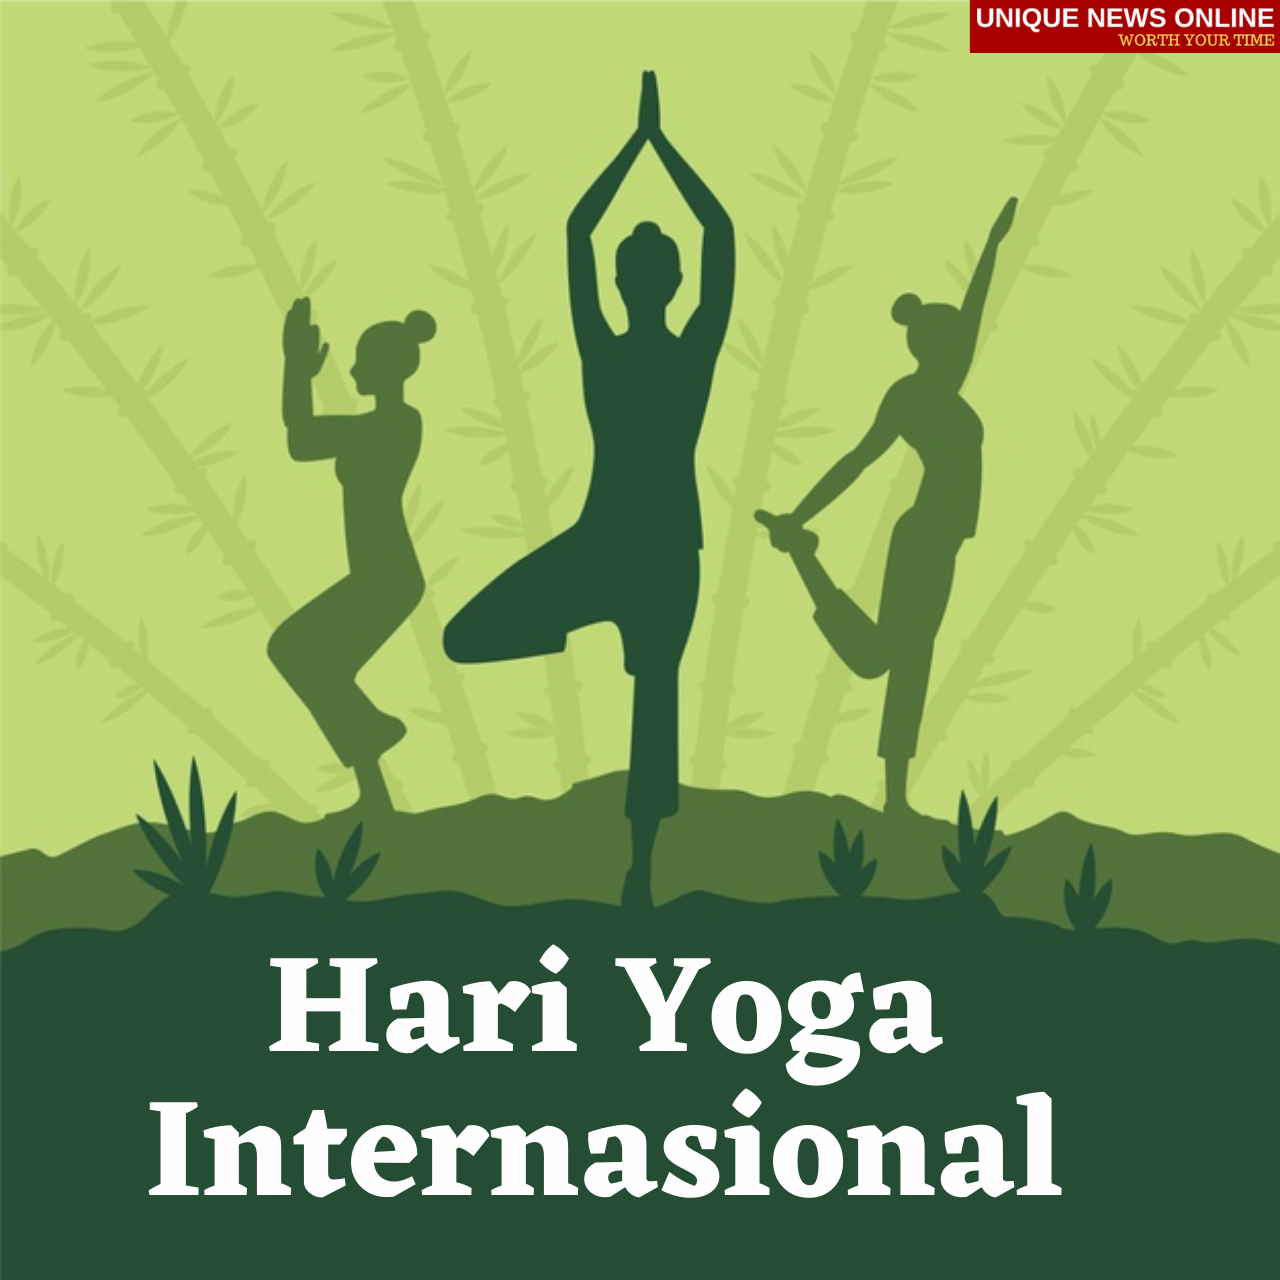 Hari Yoga Internasional 2021: Indonesian Images, Greetings, Wishes, and Quotes to Share